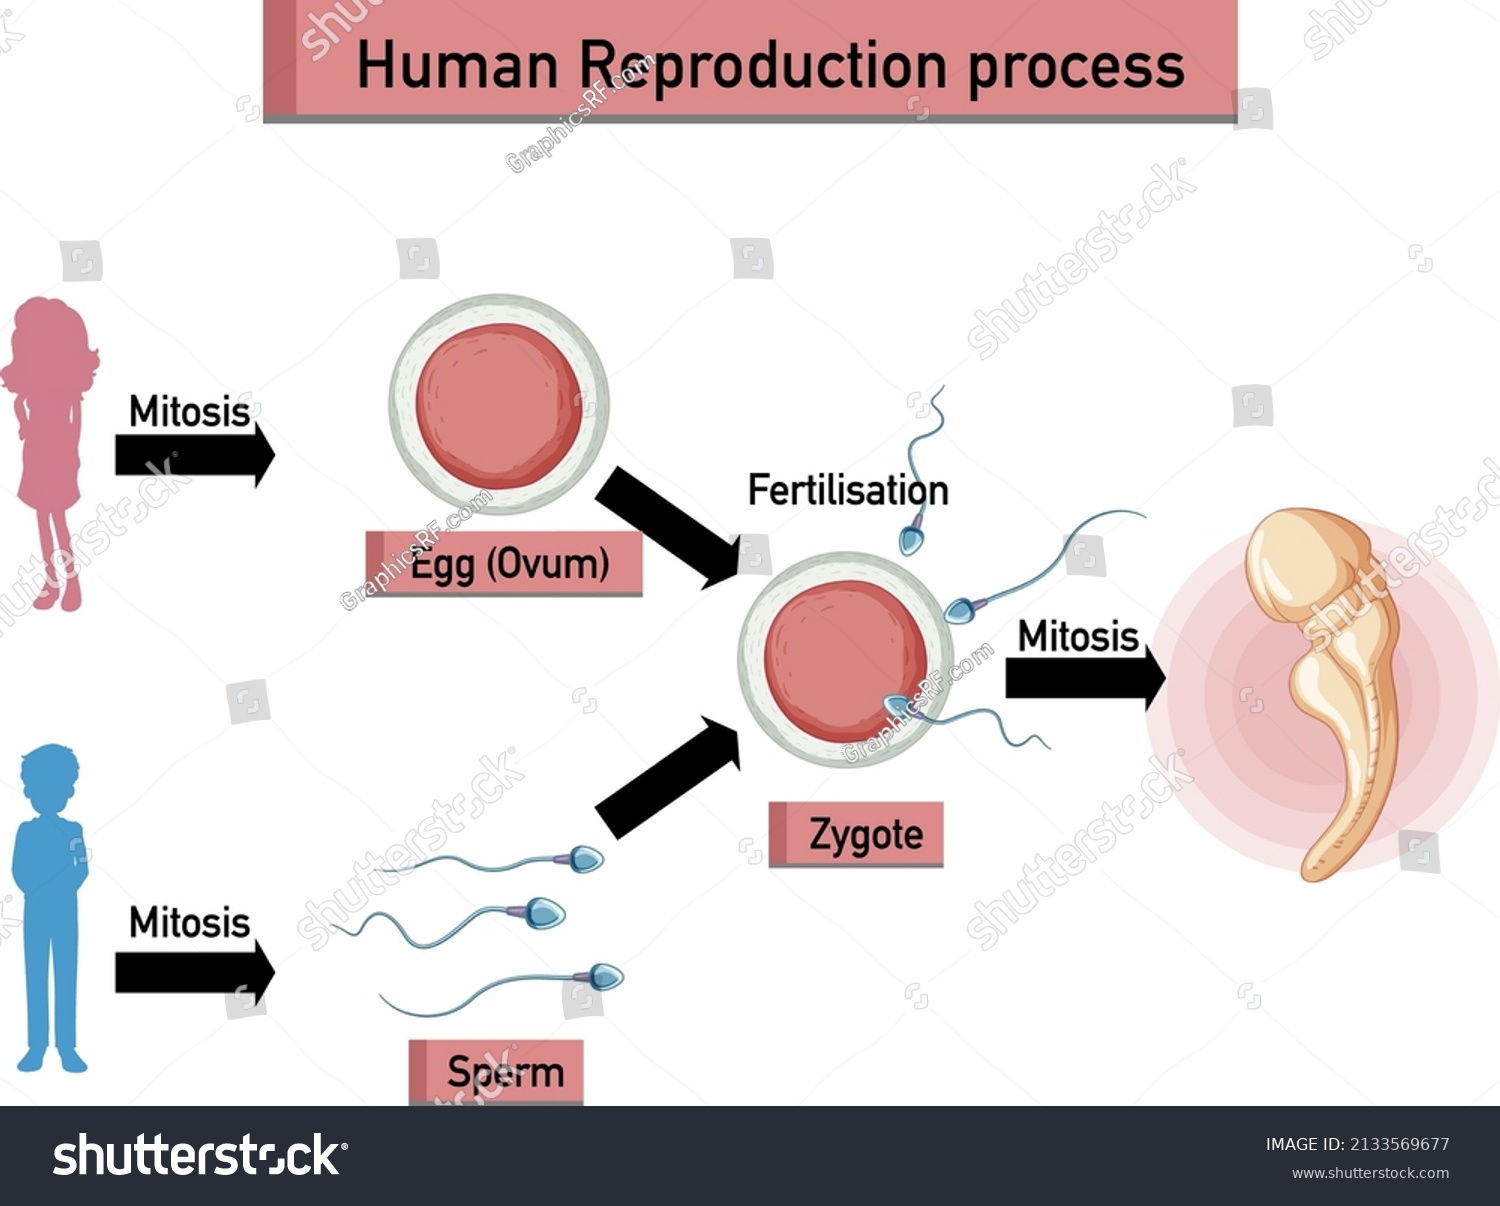 Human Reproduction Process Infographic Illustration Stock Vector Royalty Free